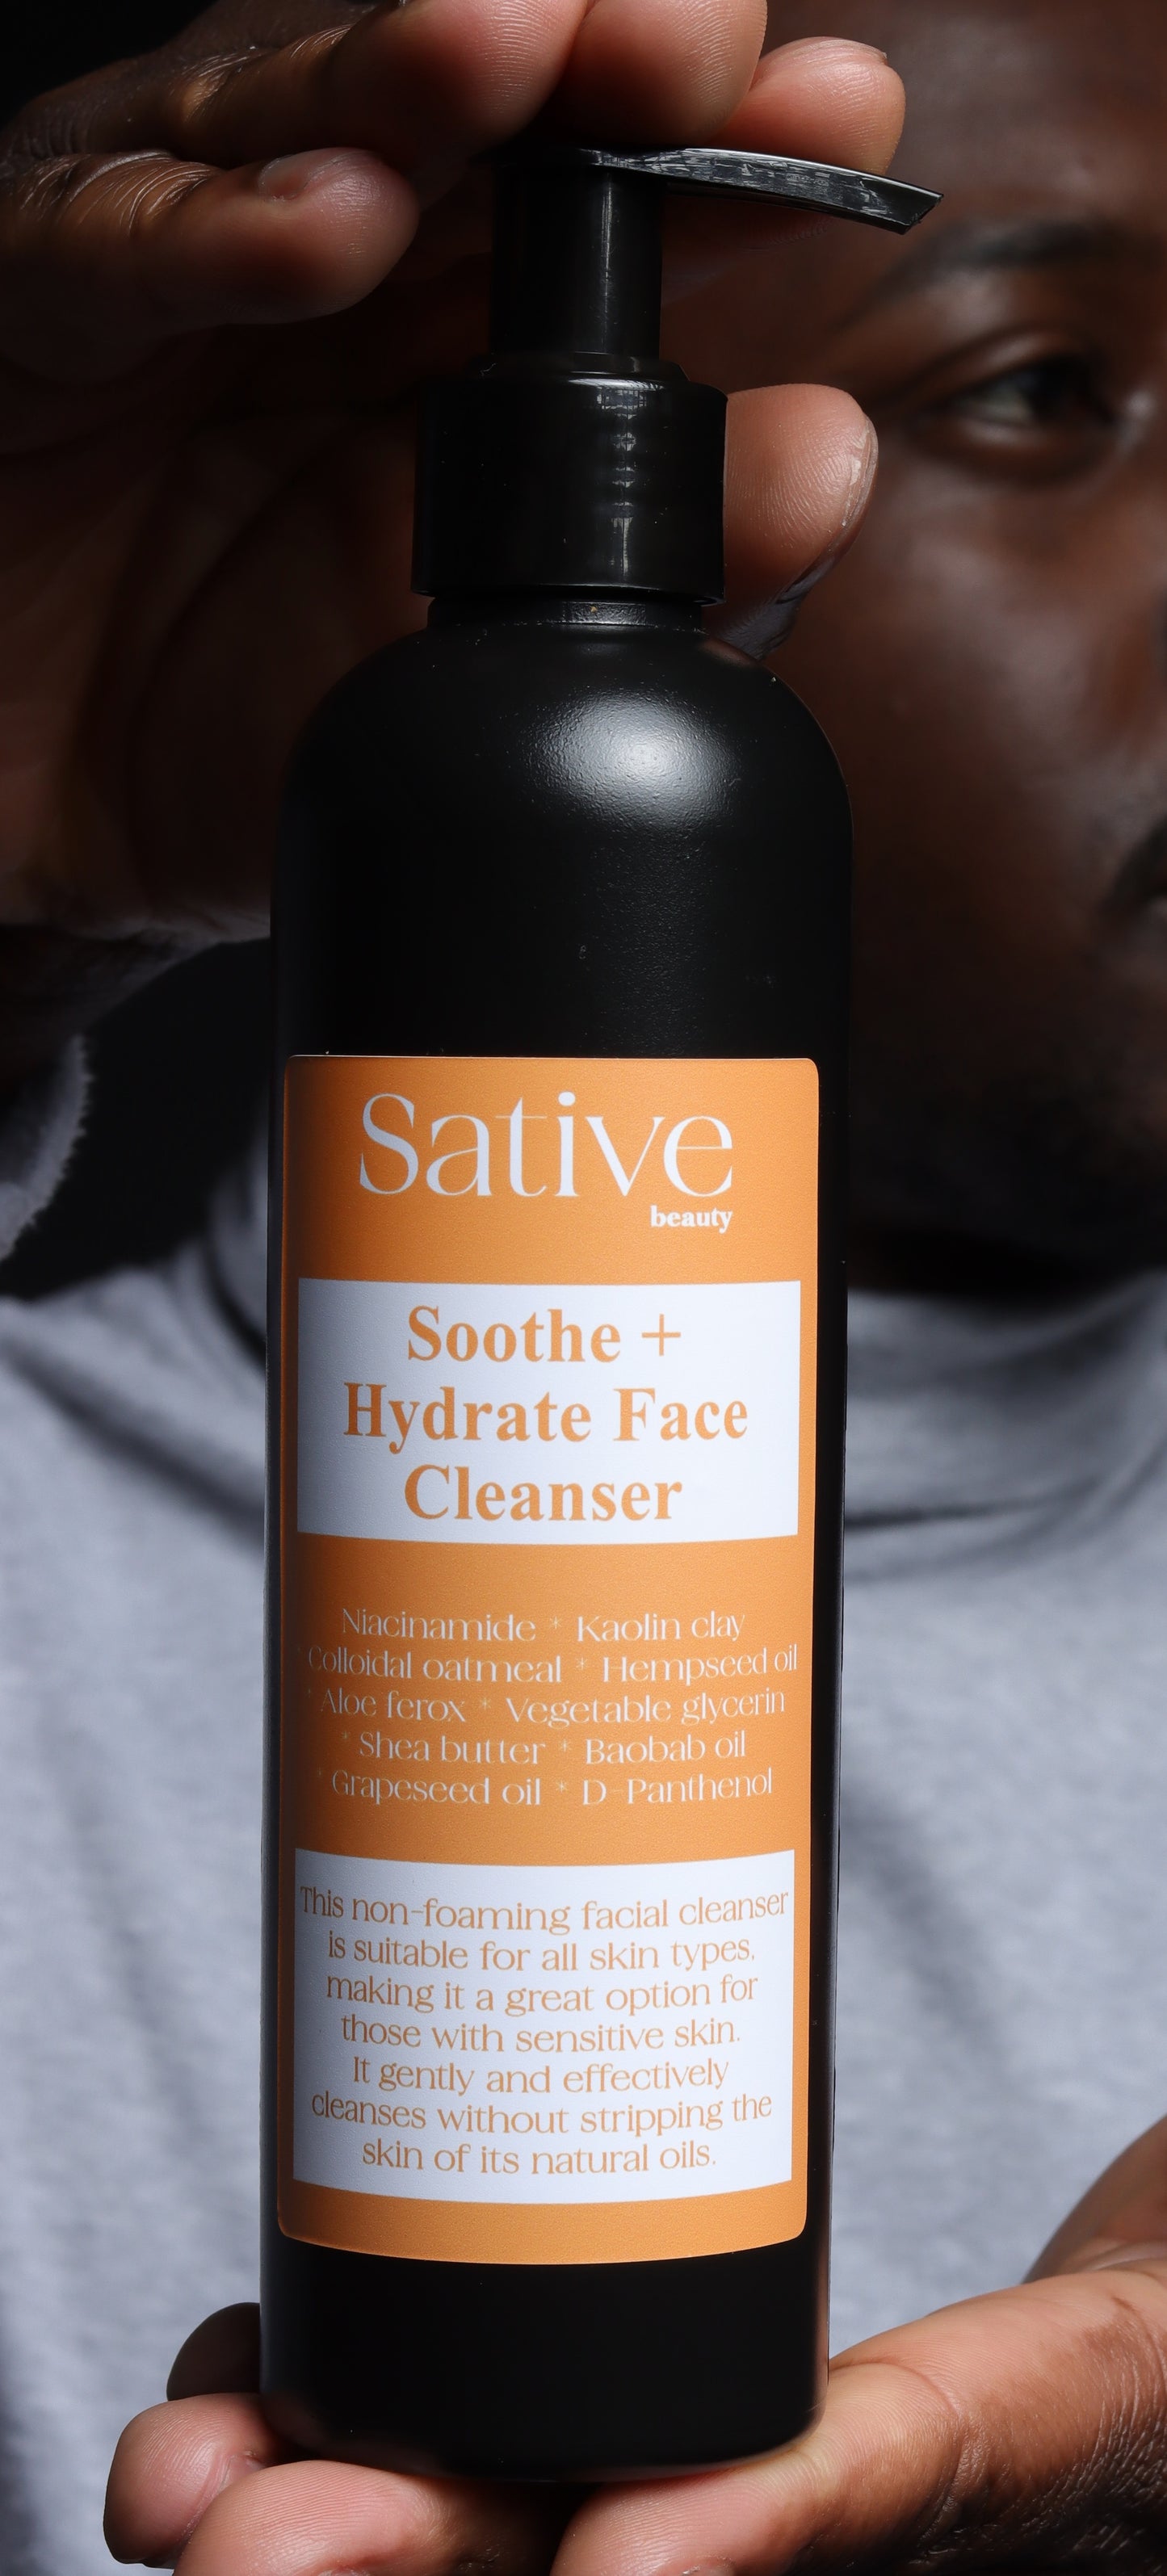 Soothe + Hydrate Face Cleanser